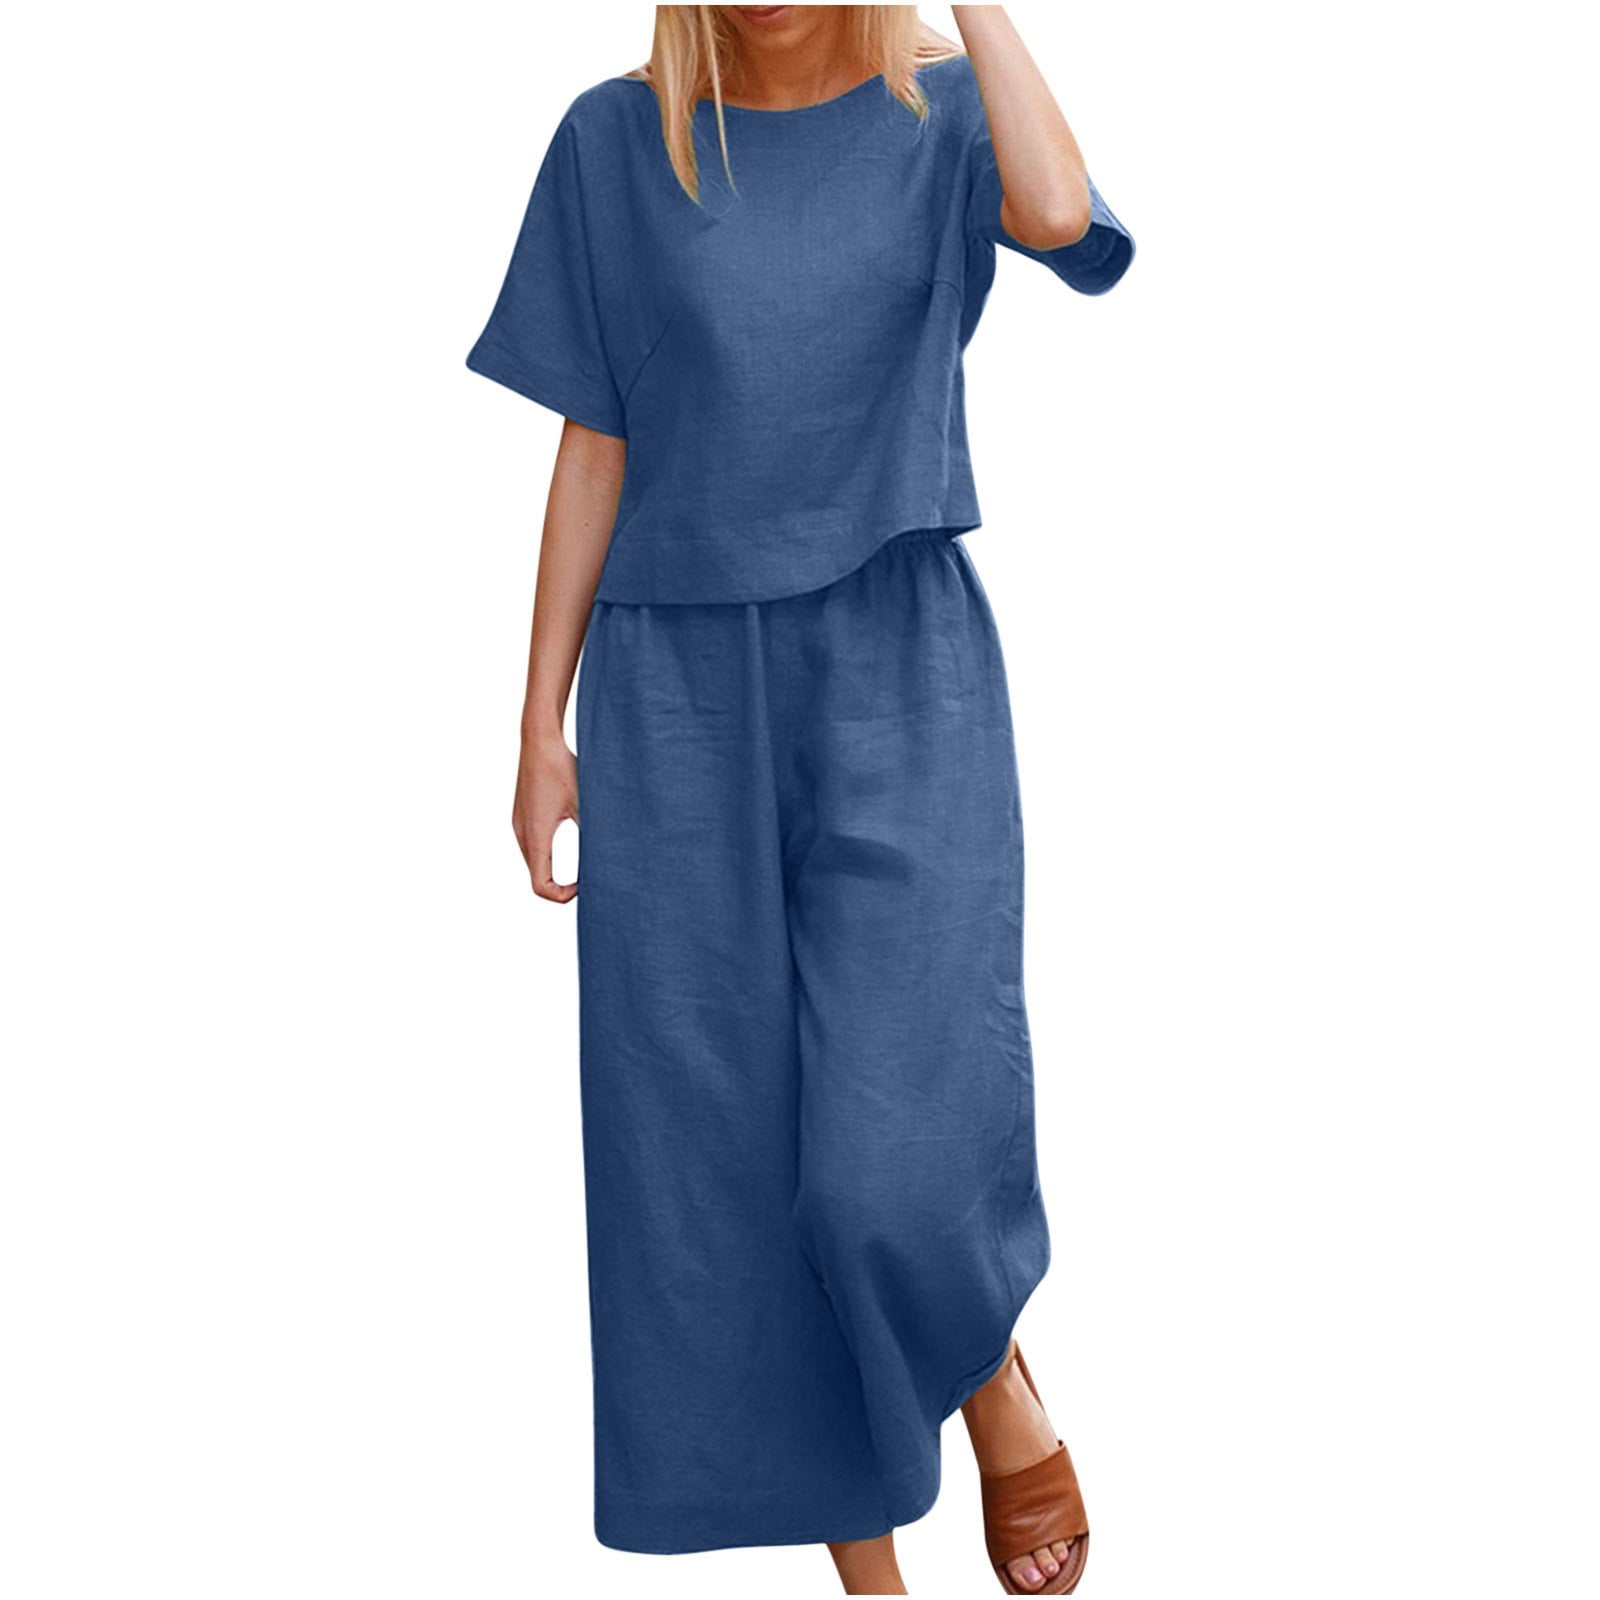 Cathalem Summer Work Pants for Women Womens Flower Prinnted Linen Capri  Pants Casual Two Piece Outfits for Women Pants Set Pants Blue Small